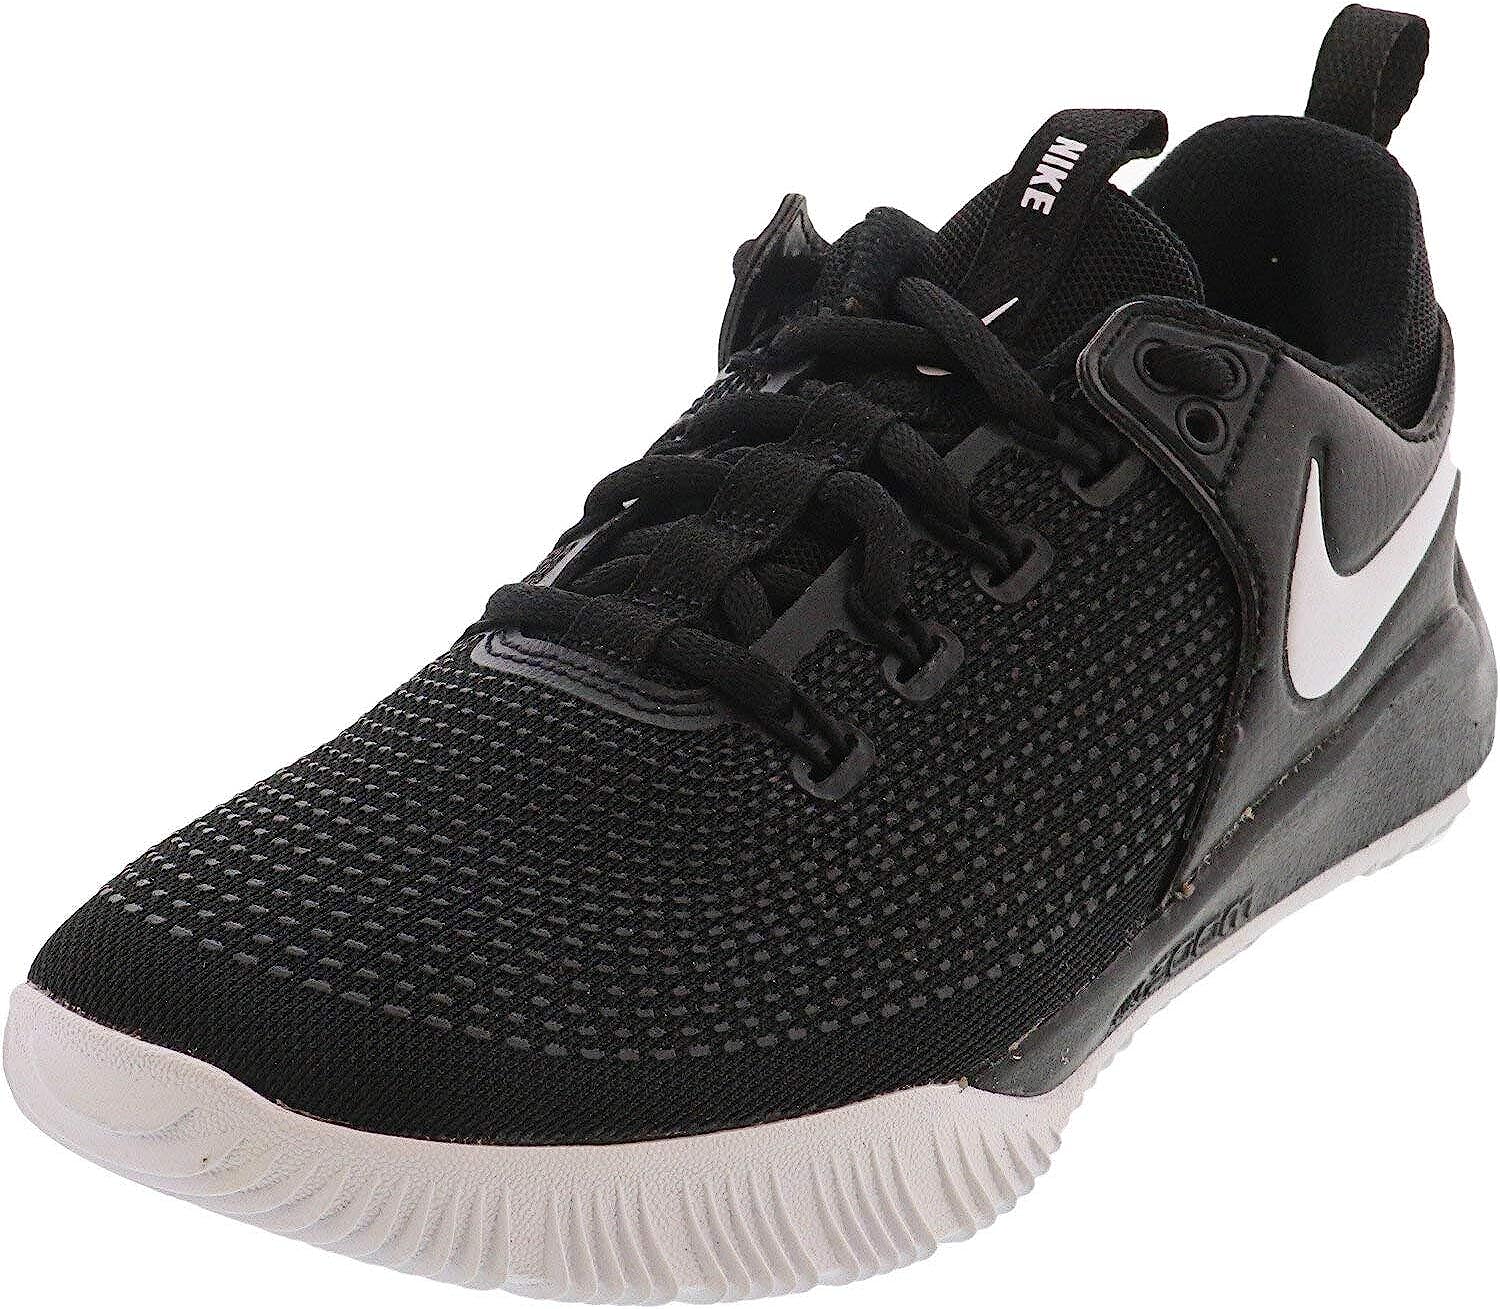 Nike Womens Zoom Hyperace 2 Volleyball Shoe (7.5 M US, [...]